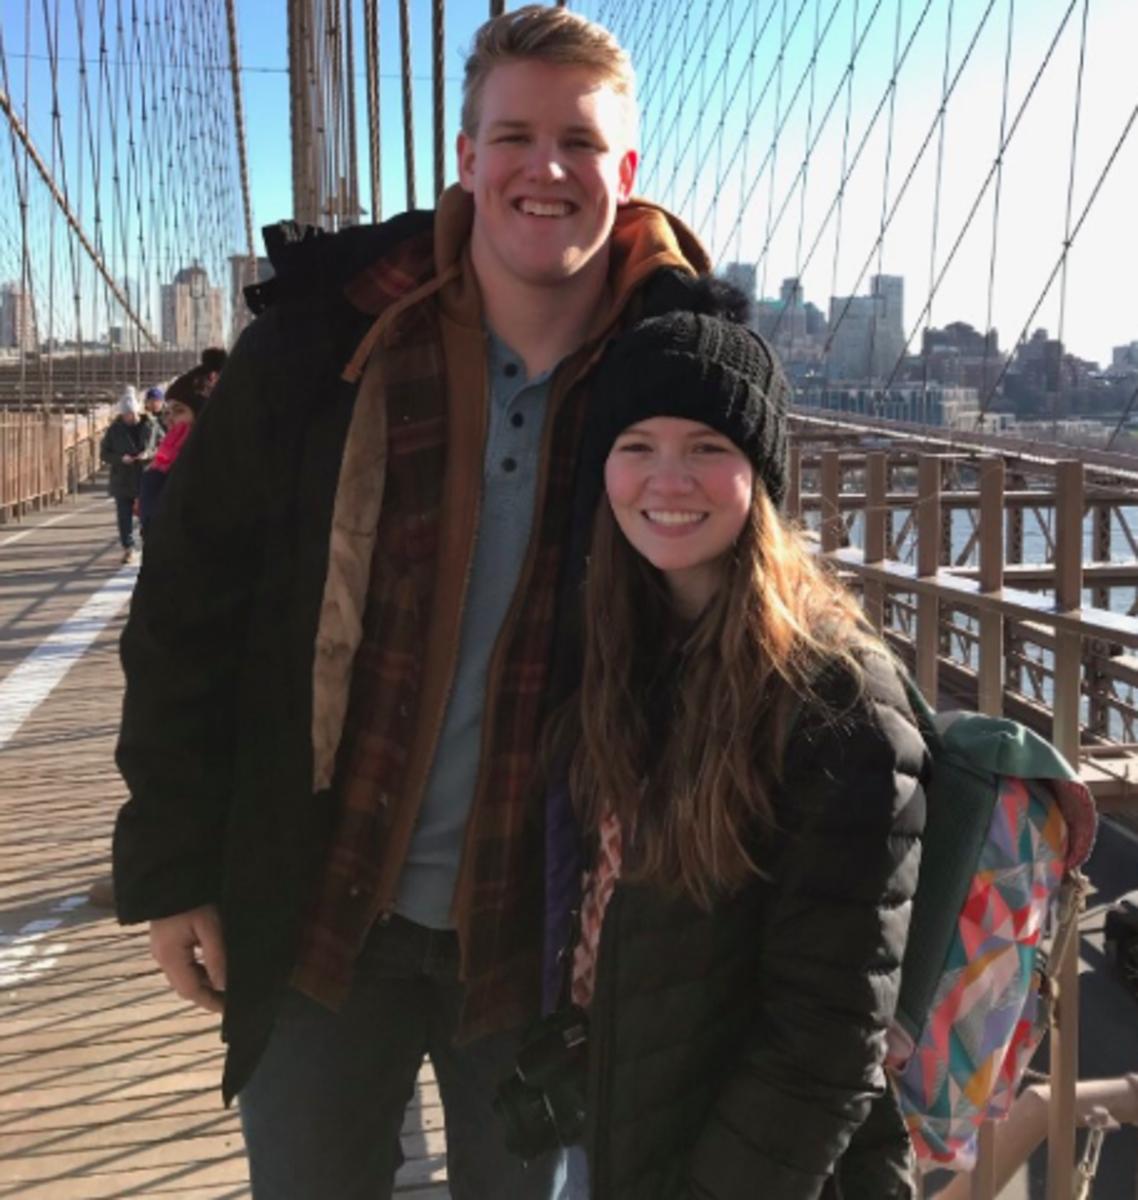 Indiana recruit Caleb Murphy is all smiles on the Brooklyn Bridge with his girlfriend Samantha Nance during their Christmas vacation trip to New York City. (Nance family photo)